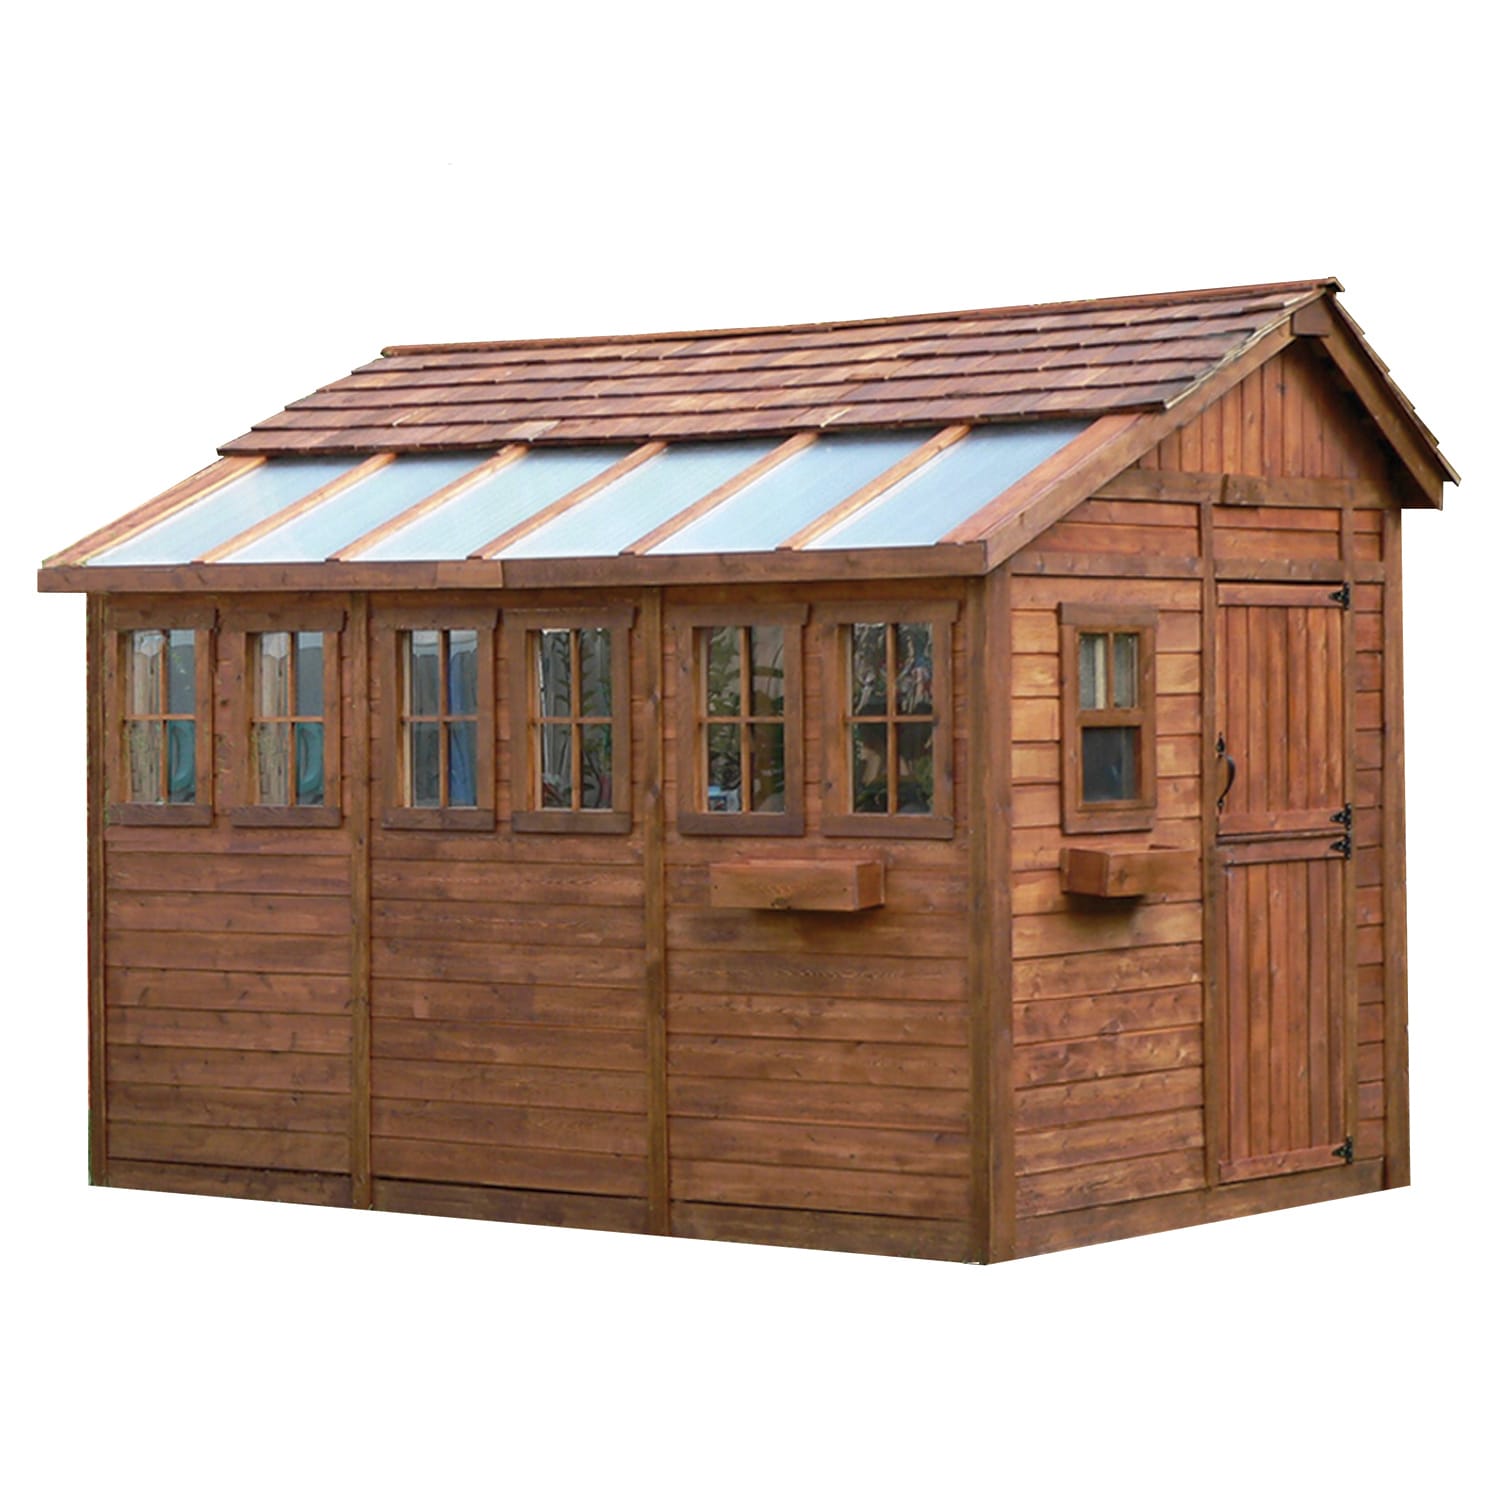  lowes garden sheds for sale